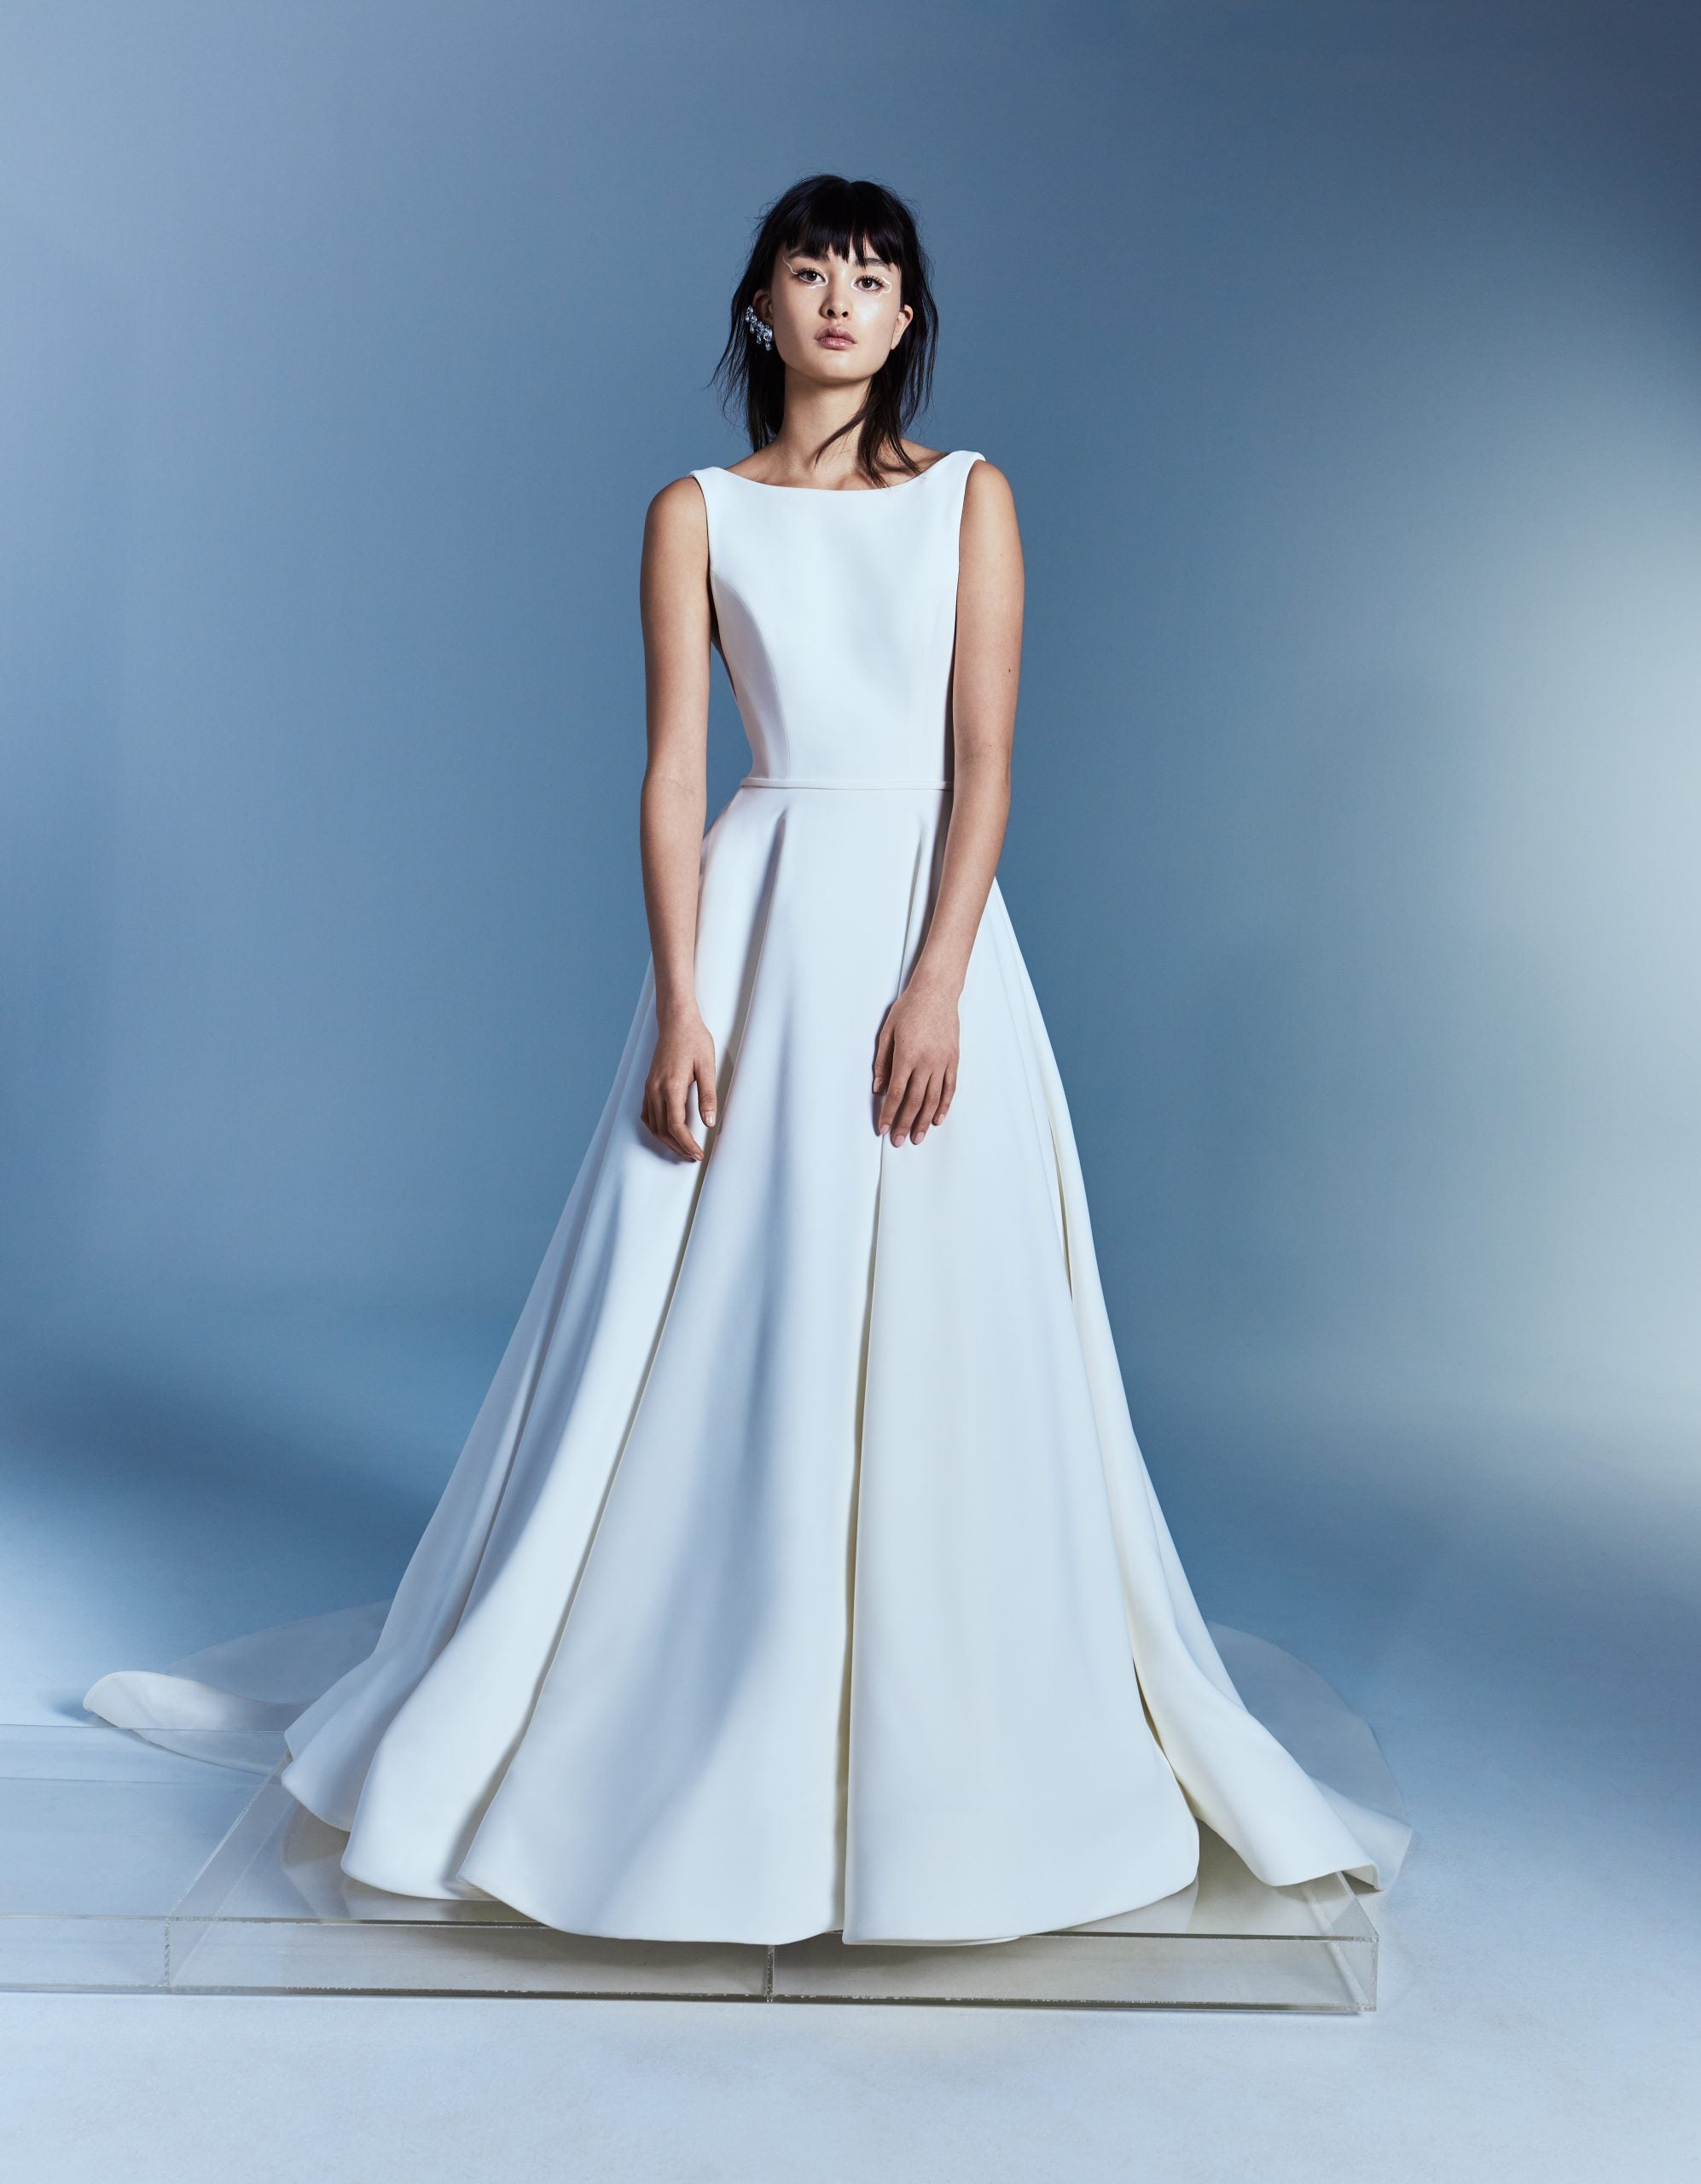 Classic And Simple A-line Gown by Alyne by Rita Vinieris